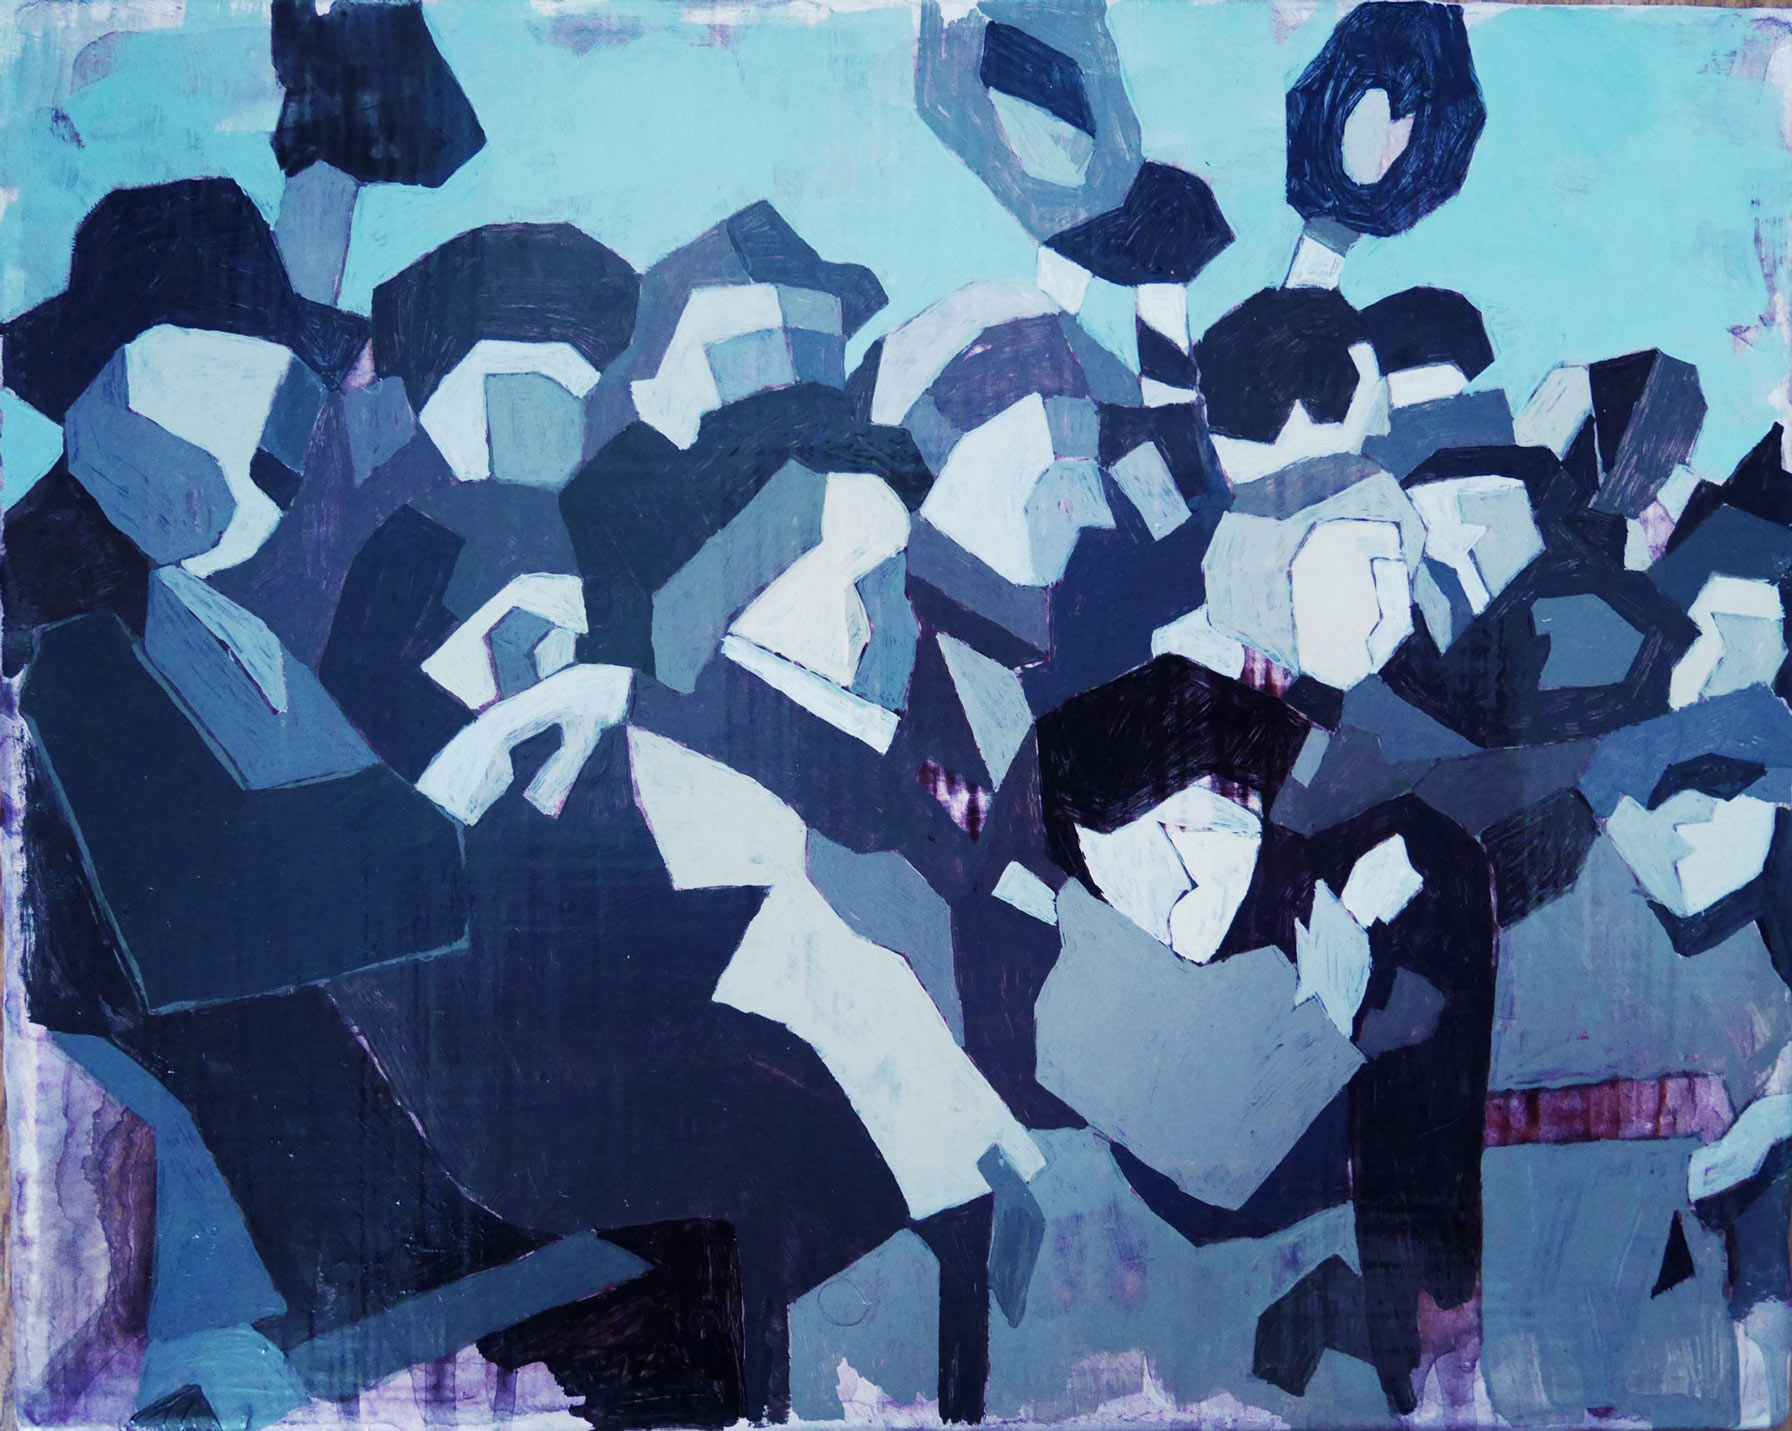 crowd-01-oil-on-canvas-20×25-1